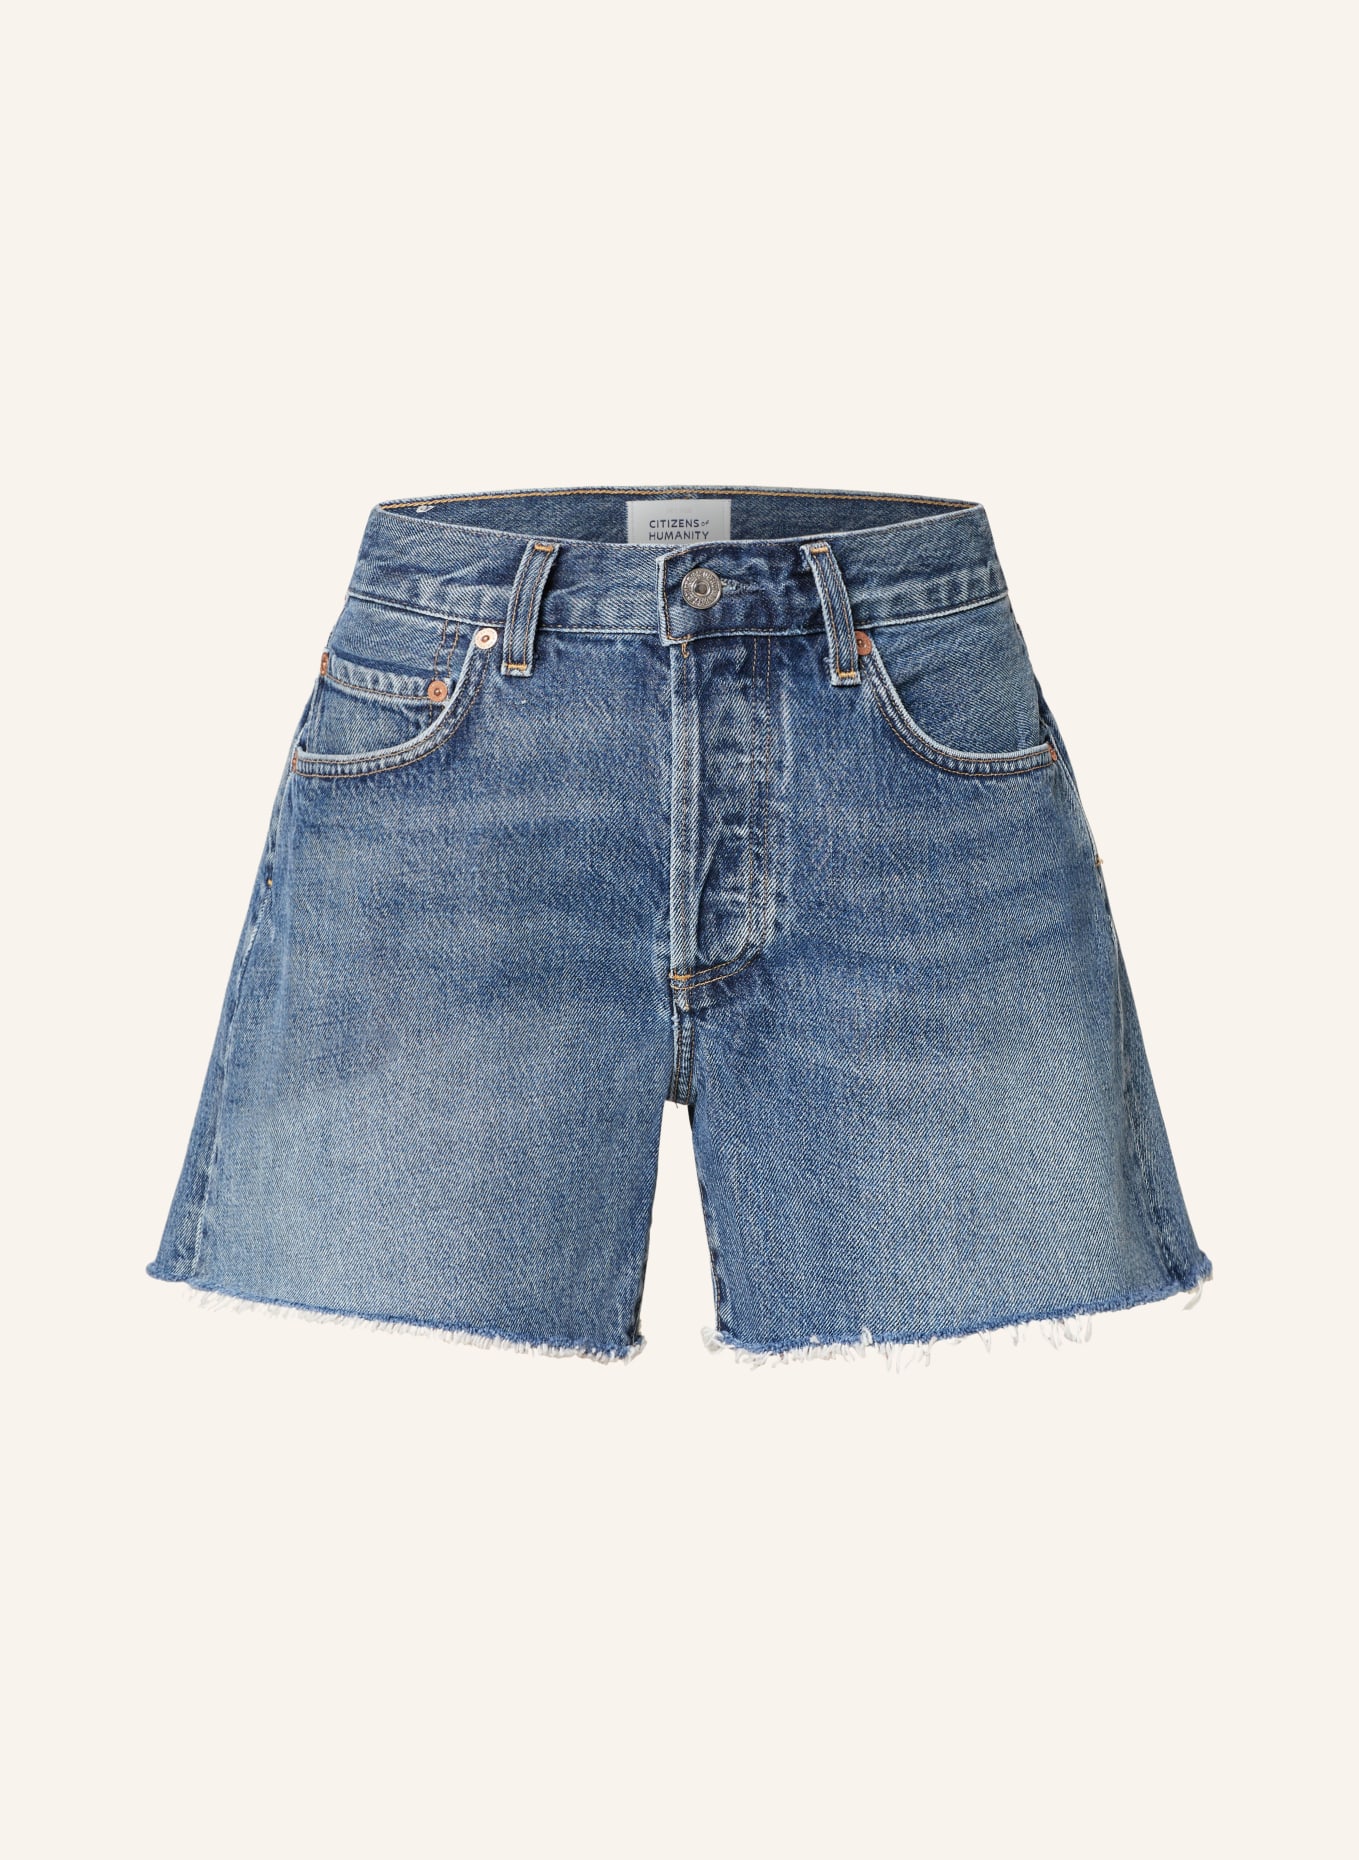 CITIZENS of HUMANITY Jeansshorts ANNABELLE, Farbe: yves med ind (Bild 1)